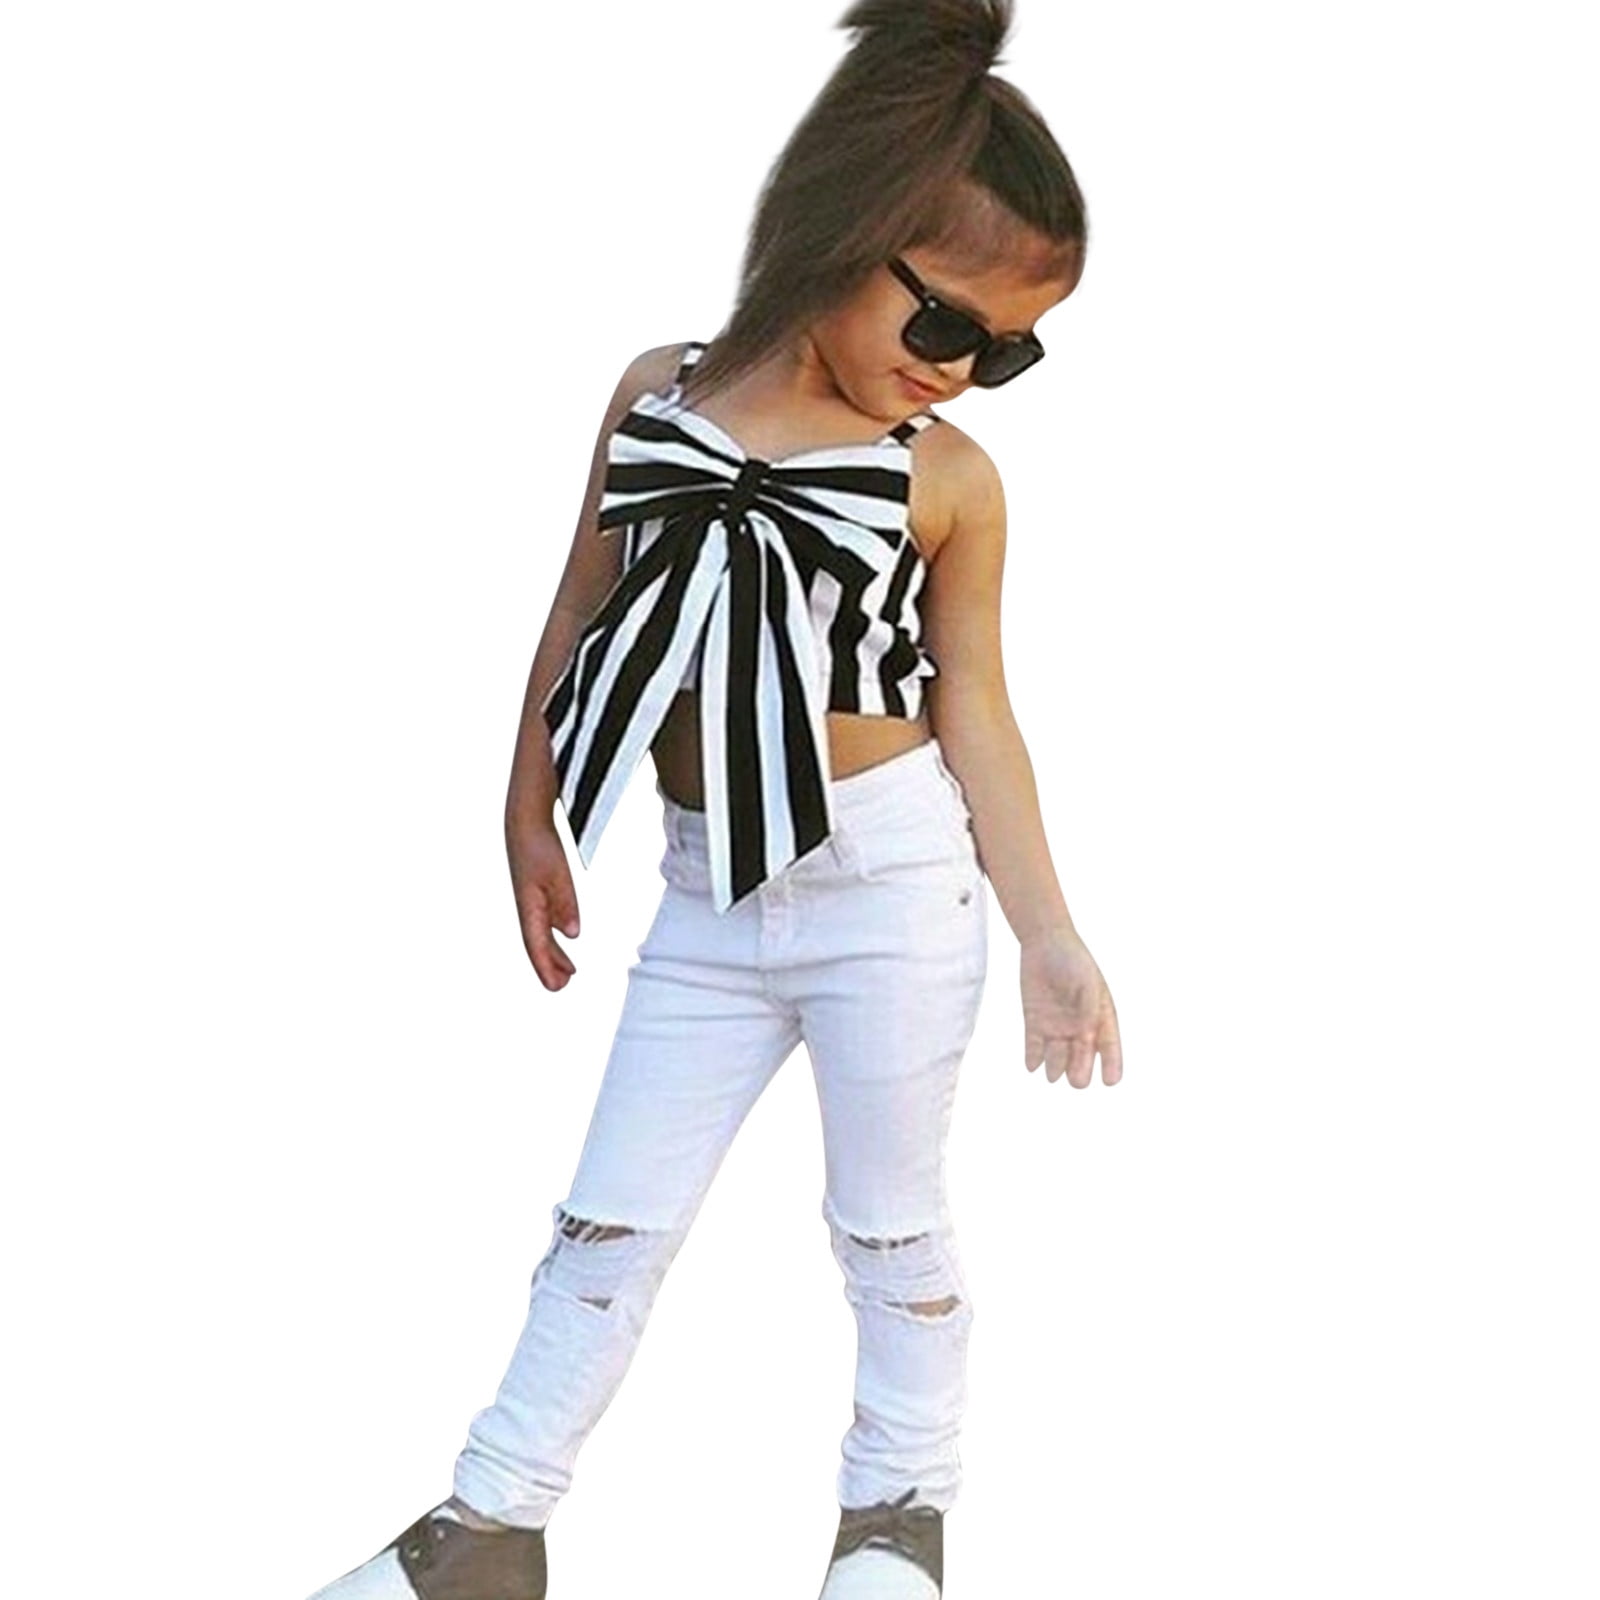 Little Girls Outfits Clothes Toddler Long Sleeve Heart Print Hoodie Shirts  Top + Leggings Kids Clothing Set : : Clothing, Shoes & Accessories